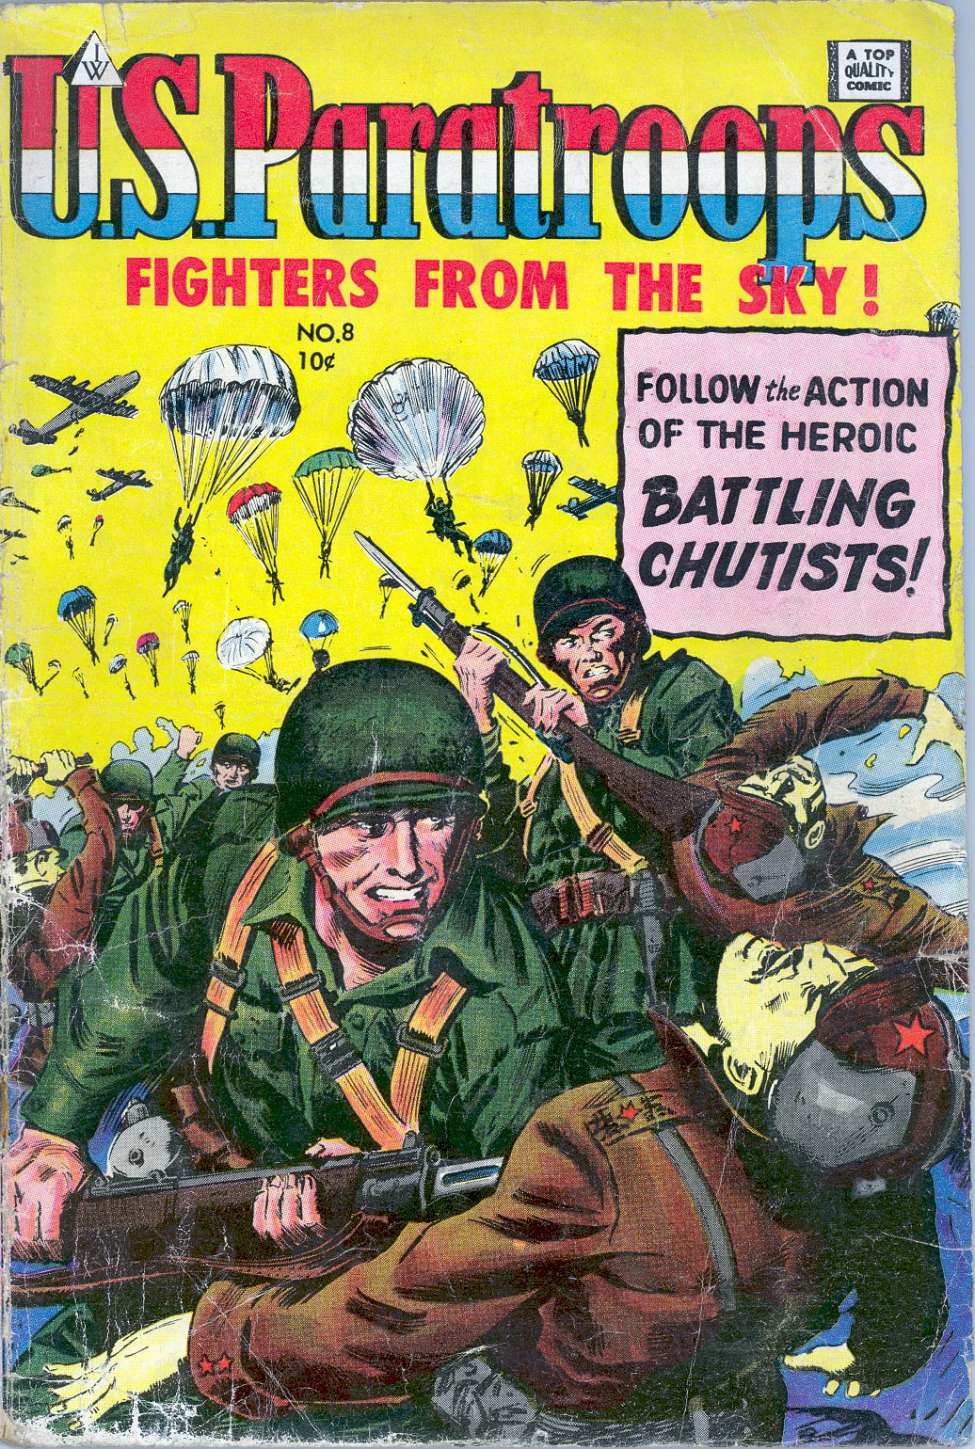 Book Cover For U.S. Paratroops 8